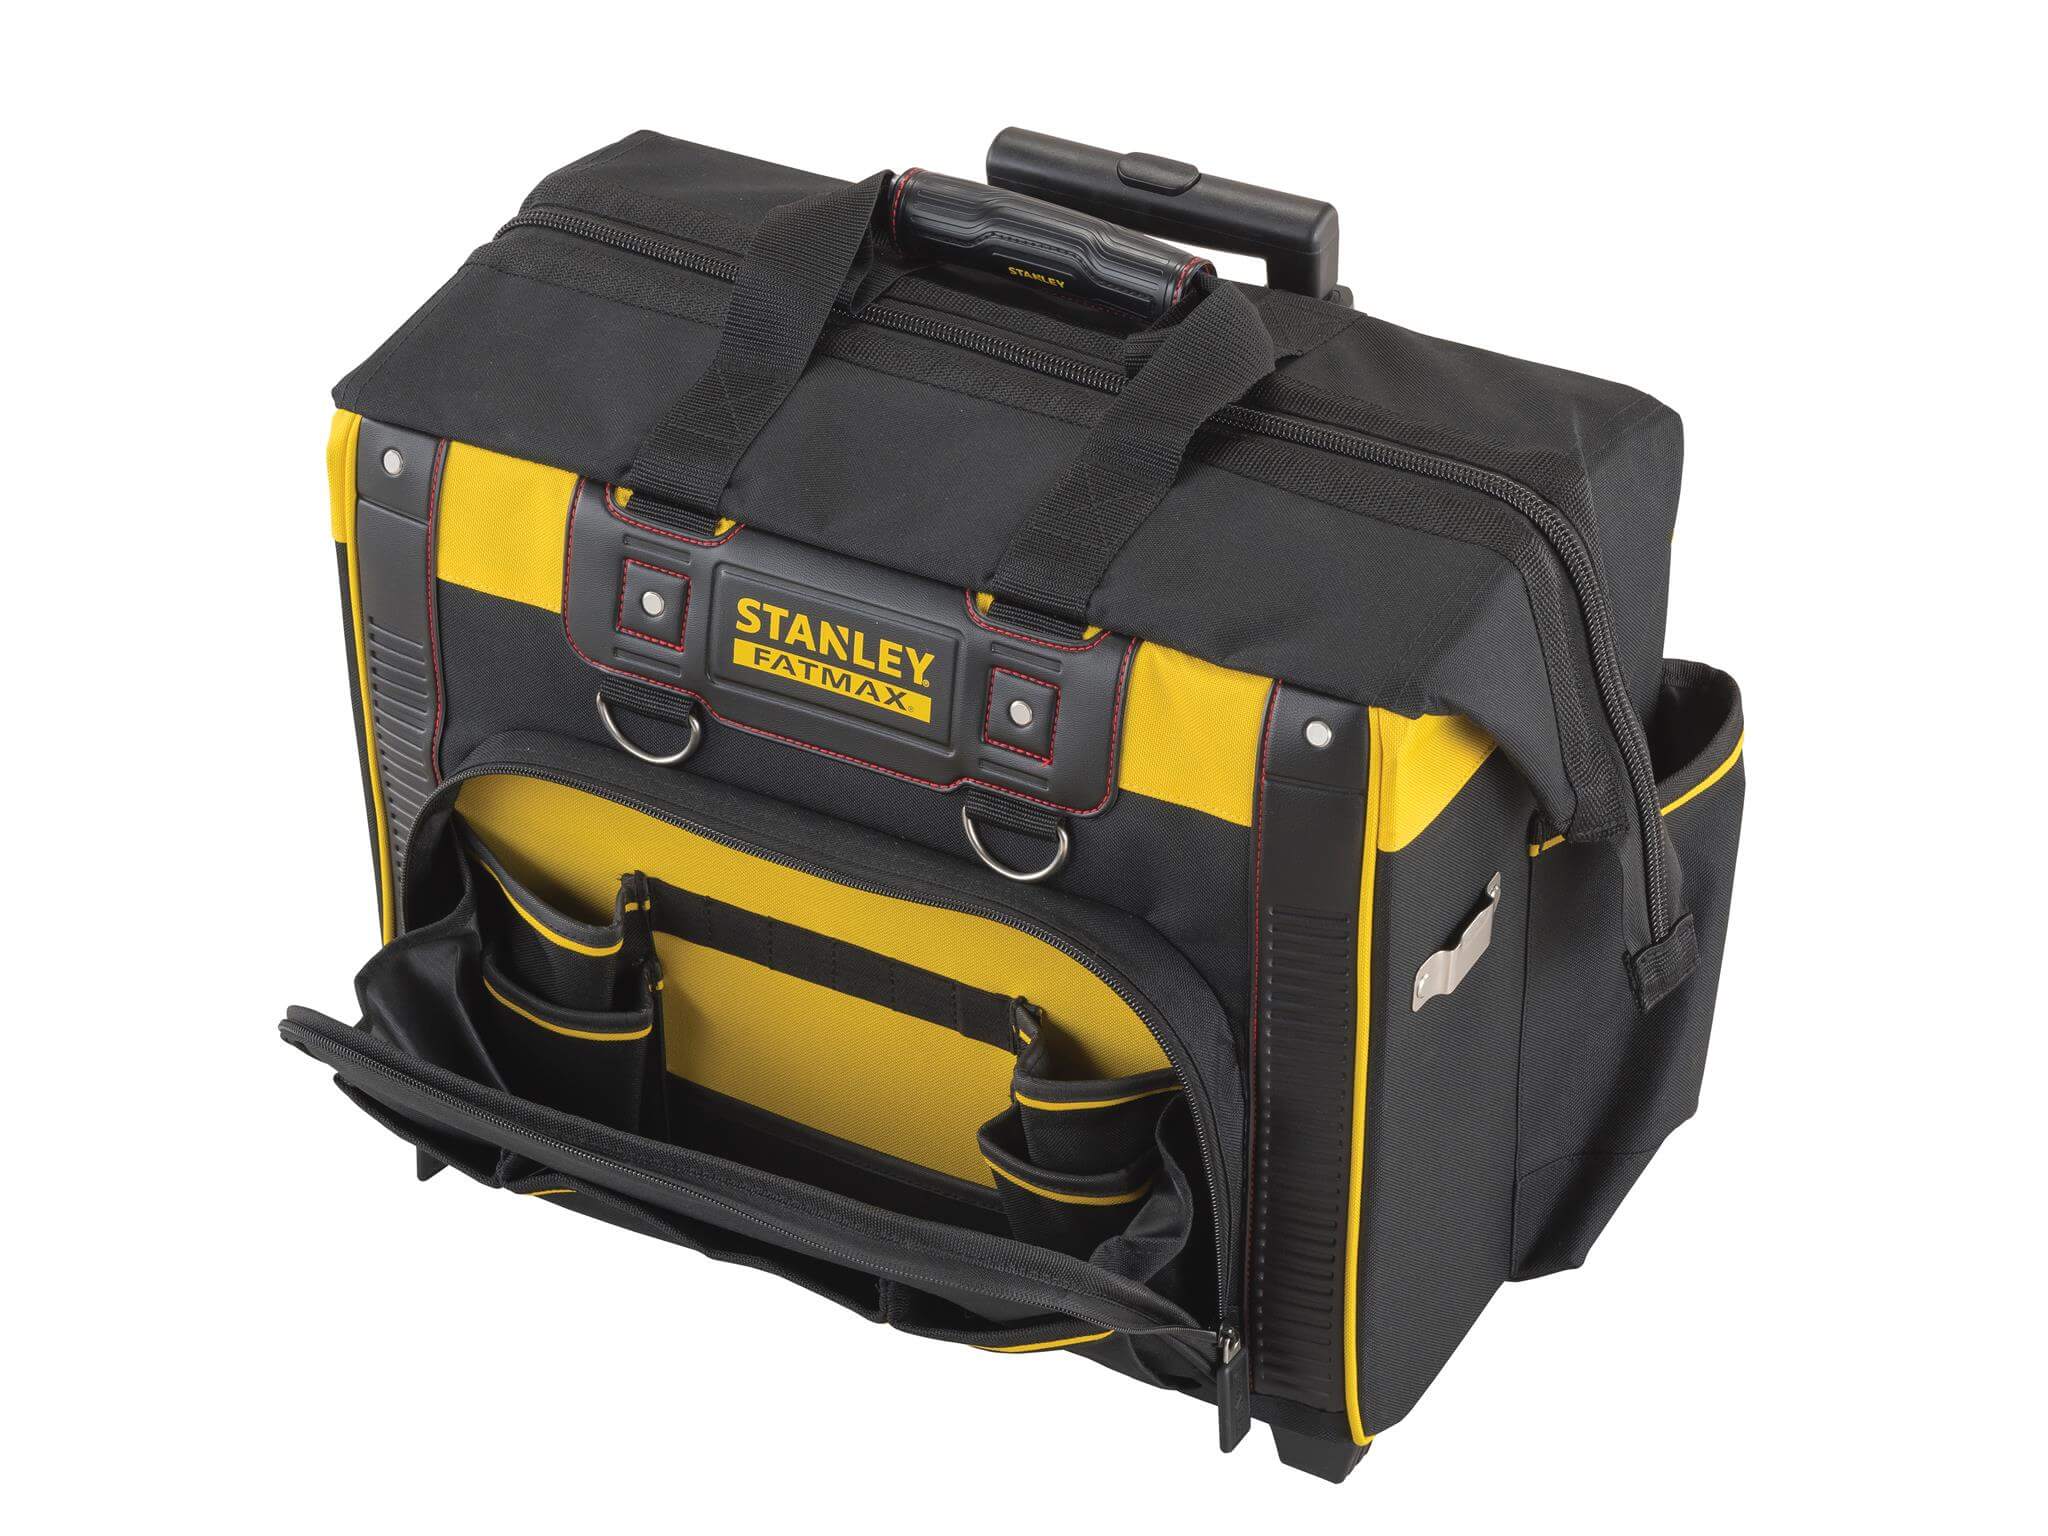 Stanley FatMax Backpack on Wheels - STA179215 | UKHS.tv Tools-To-Go